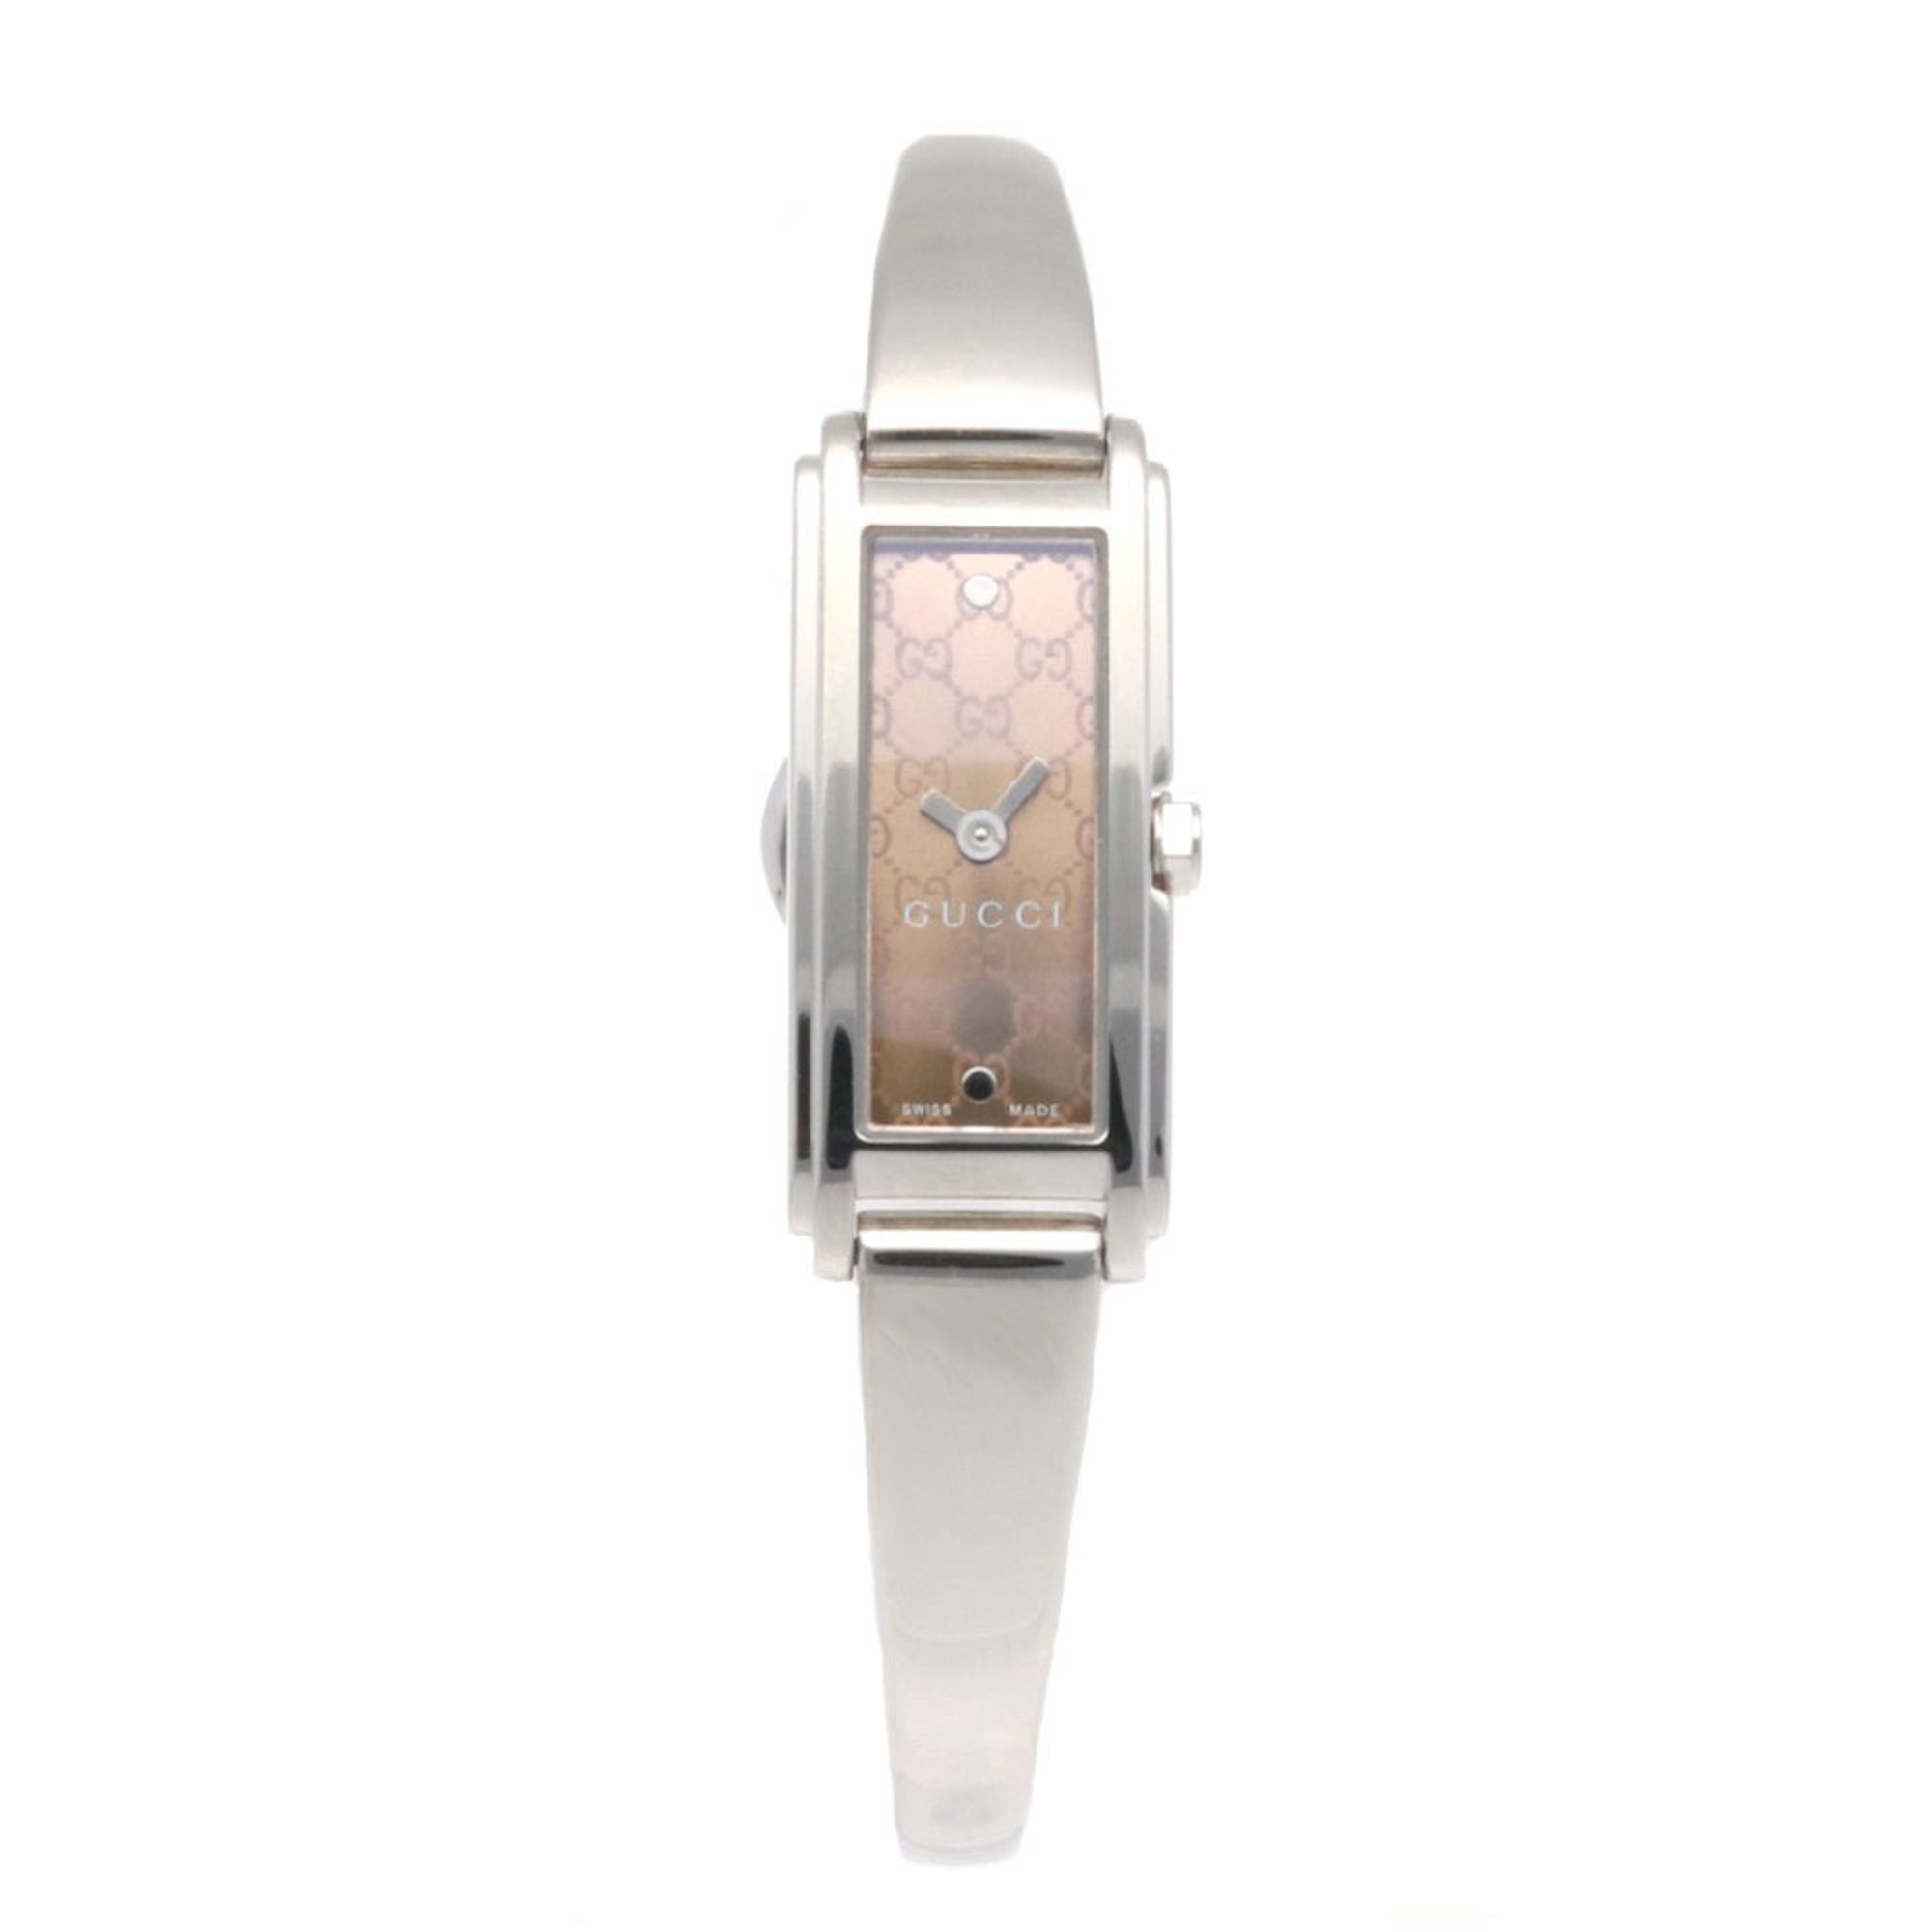 Gucci G-Line Watch Stainless Steel 109 Ladies GUCCI Bangle